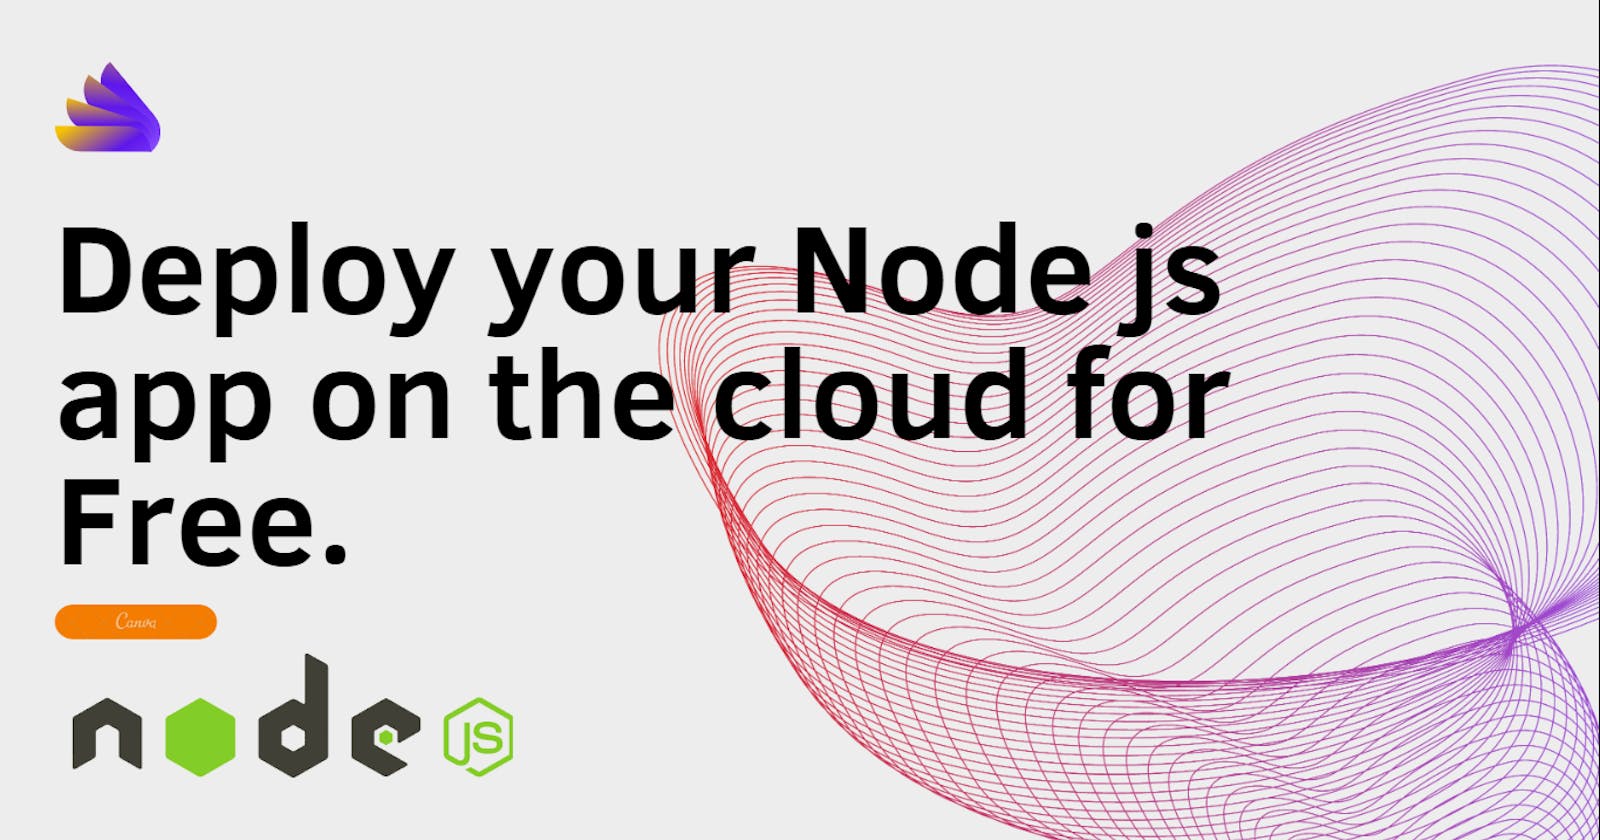 Deploy your Node js app on the cloud for free : Here's how !